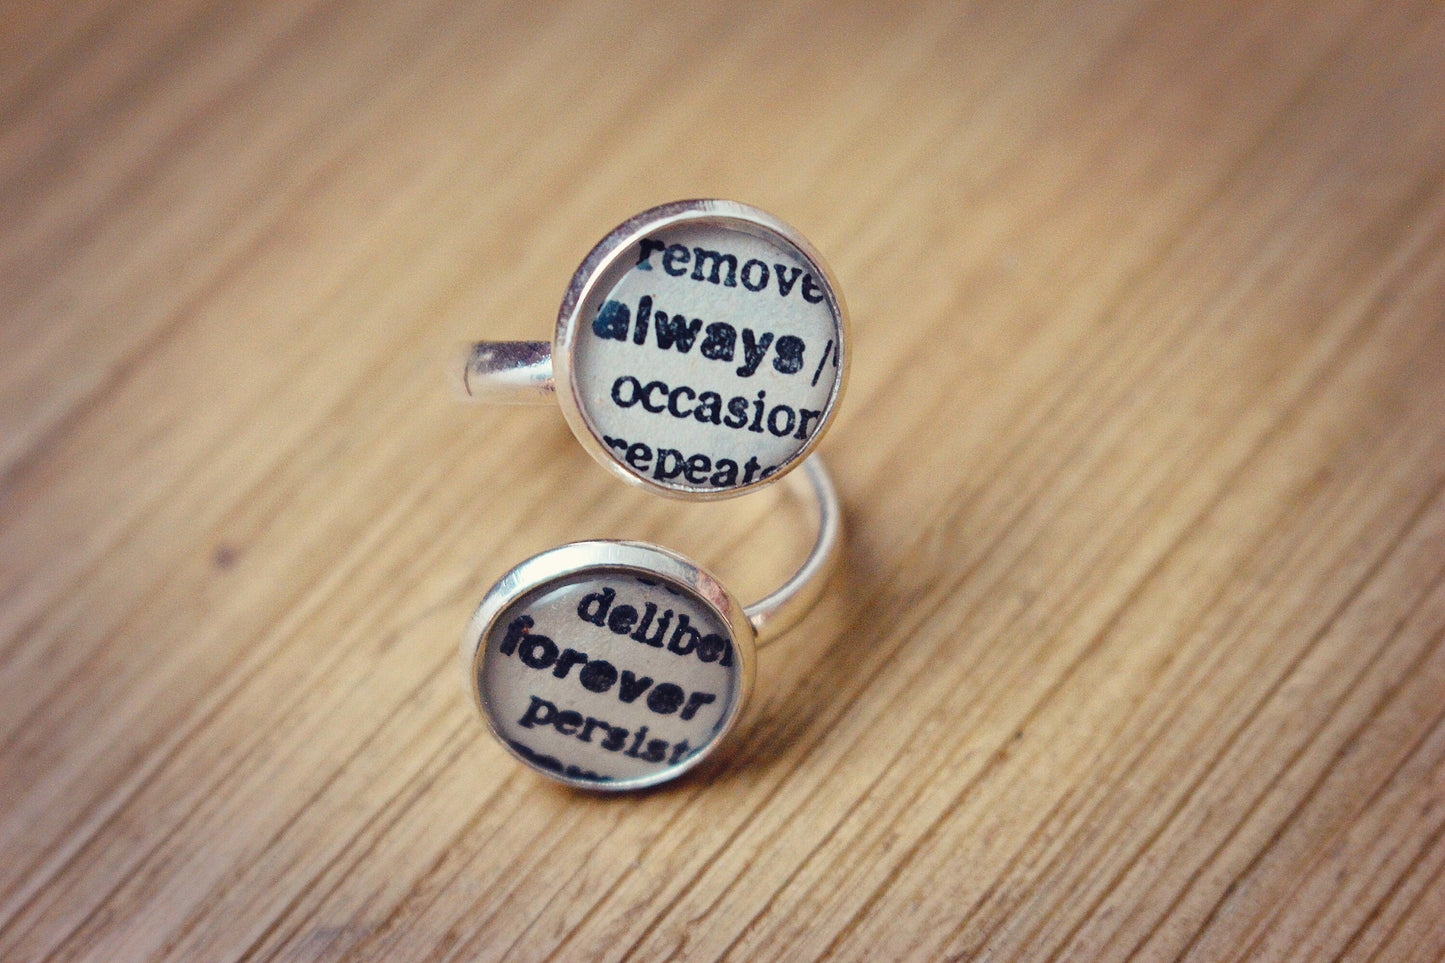 Upcycled Dictionary Definition Rings Reclaimed dictionary Your Choice of Words. Family Home Love Life Always Forever Dream Mum Hero Friend